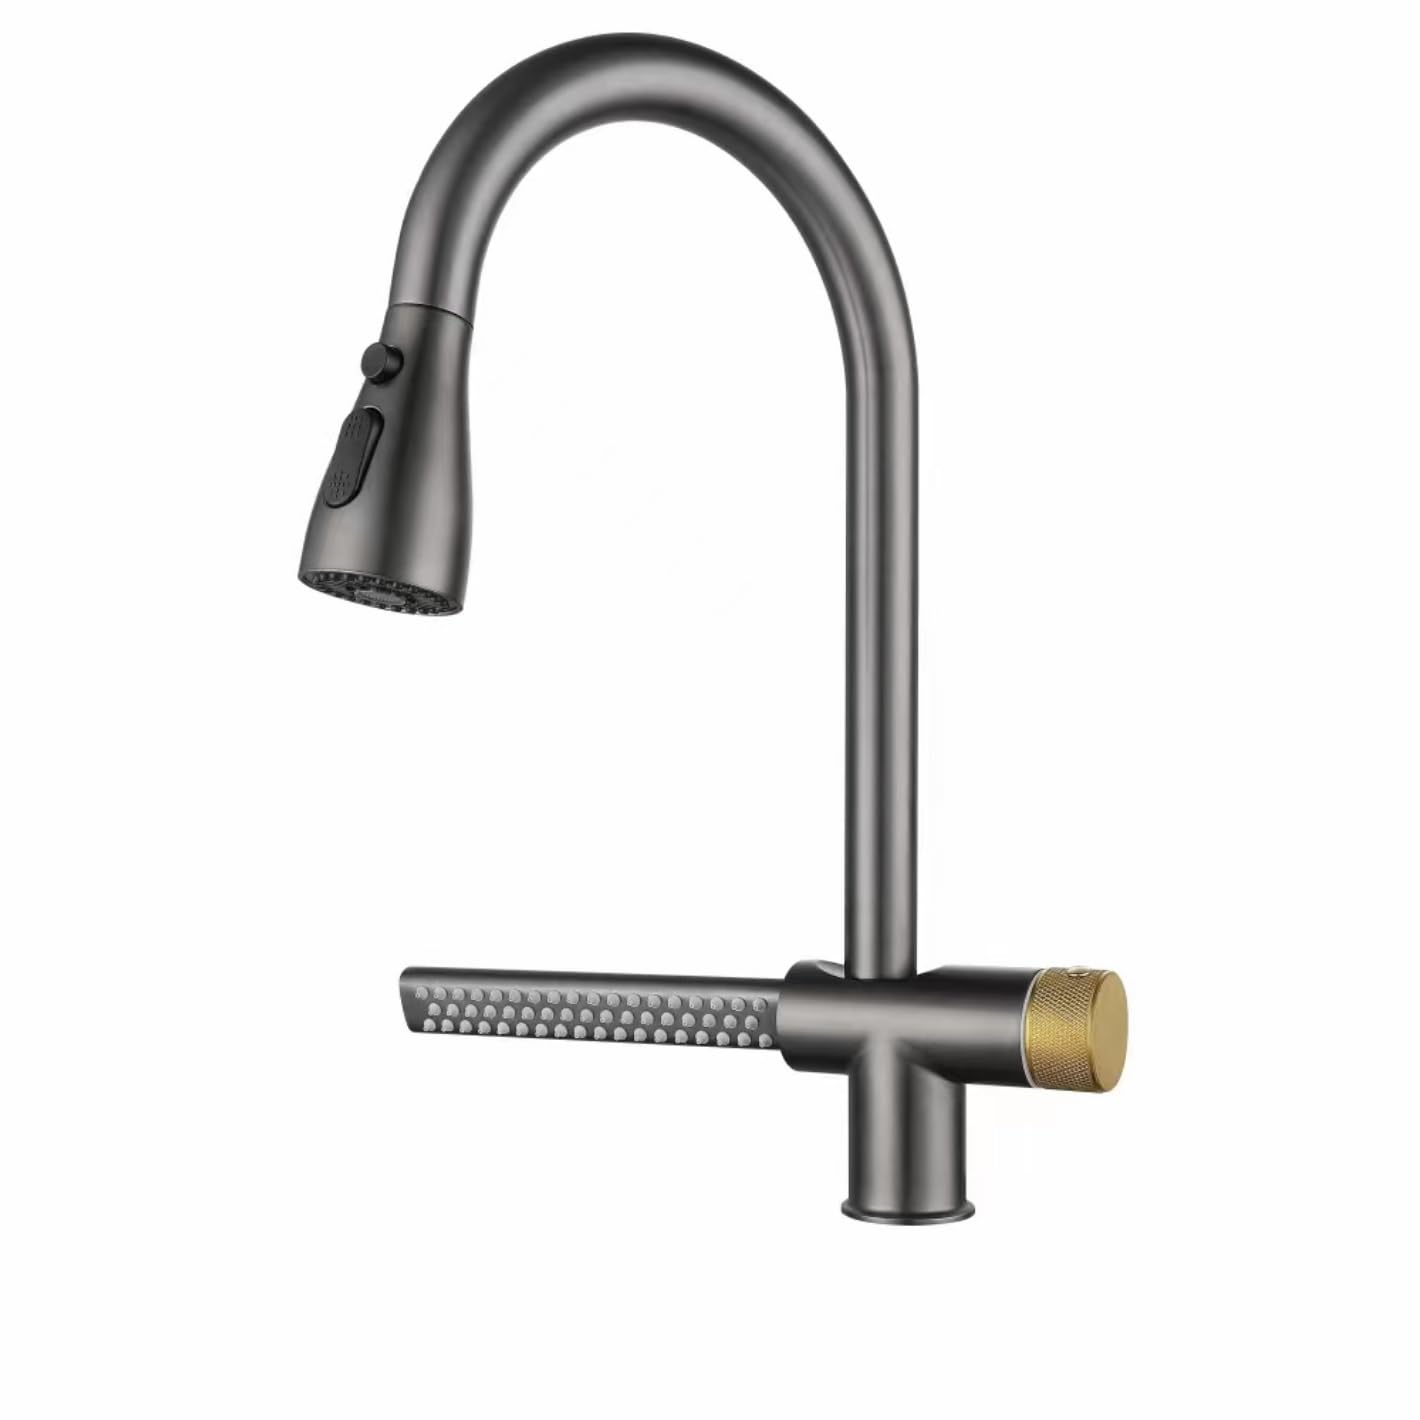 InArt 360° Rotatable Brass Kitchen Faucet, Pull Out Sprayer, Waterfall & Swivel - Hot & Cold Water Single Hole Mixer Tap - InArt-Studio